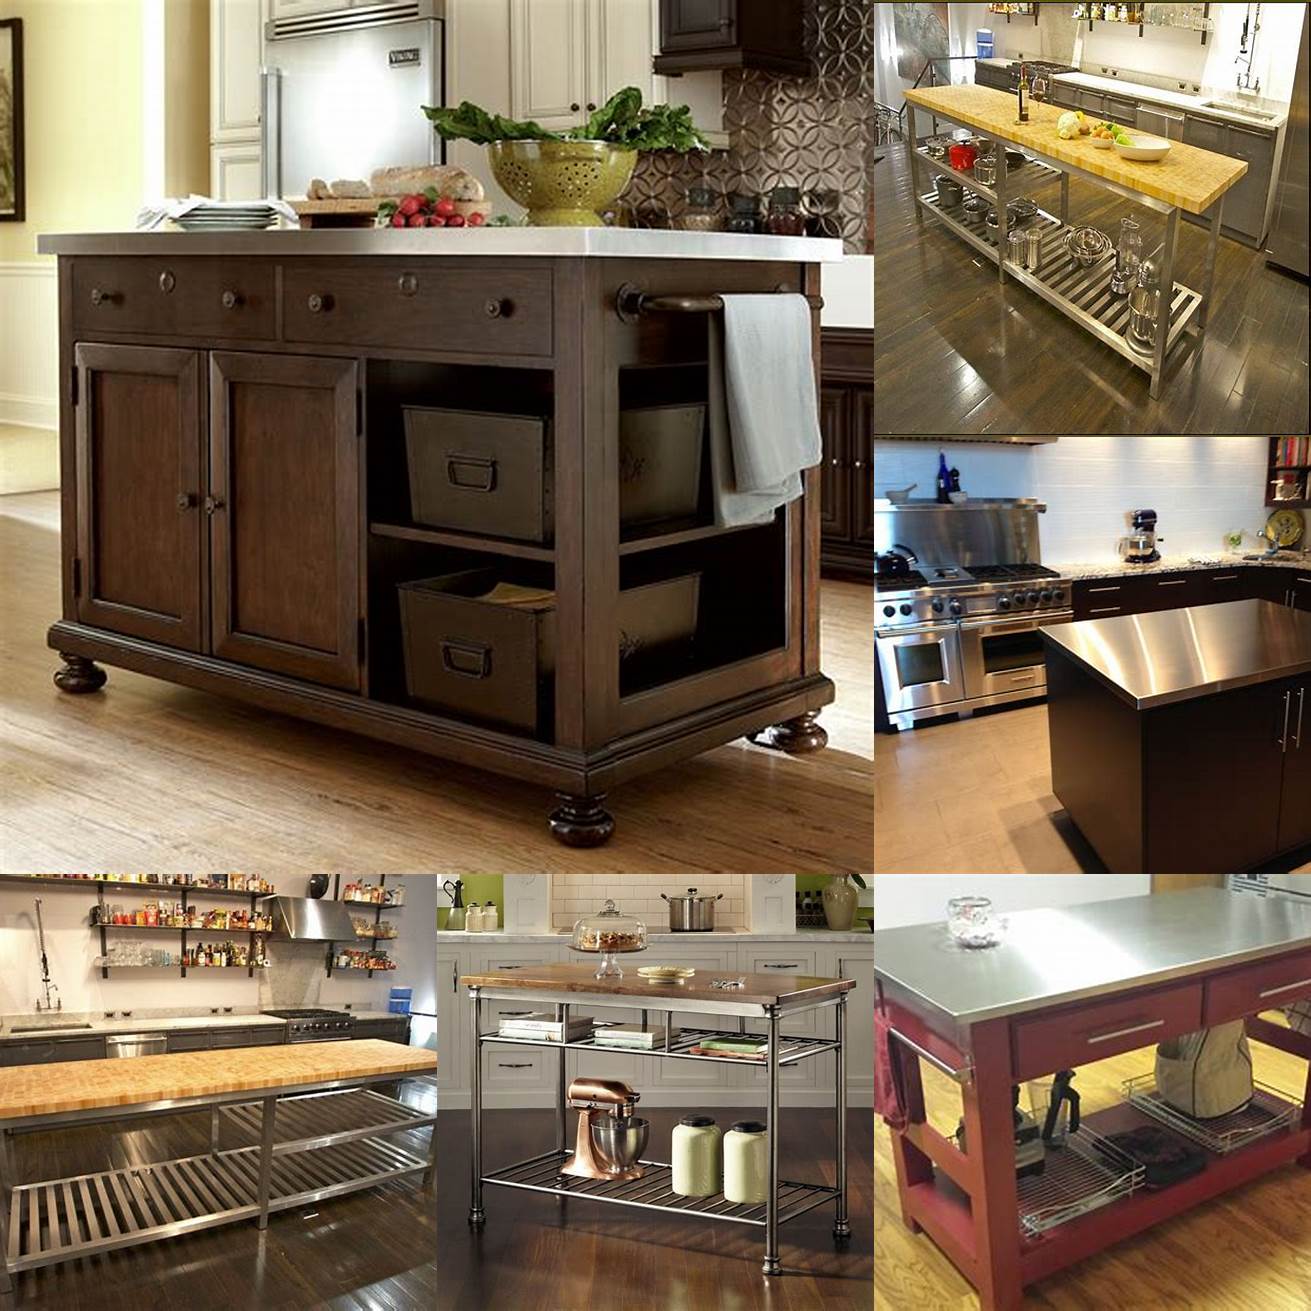 A stainless steel kitchen island with a butcher block top